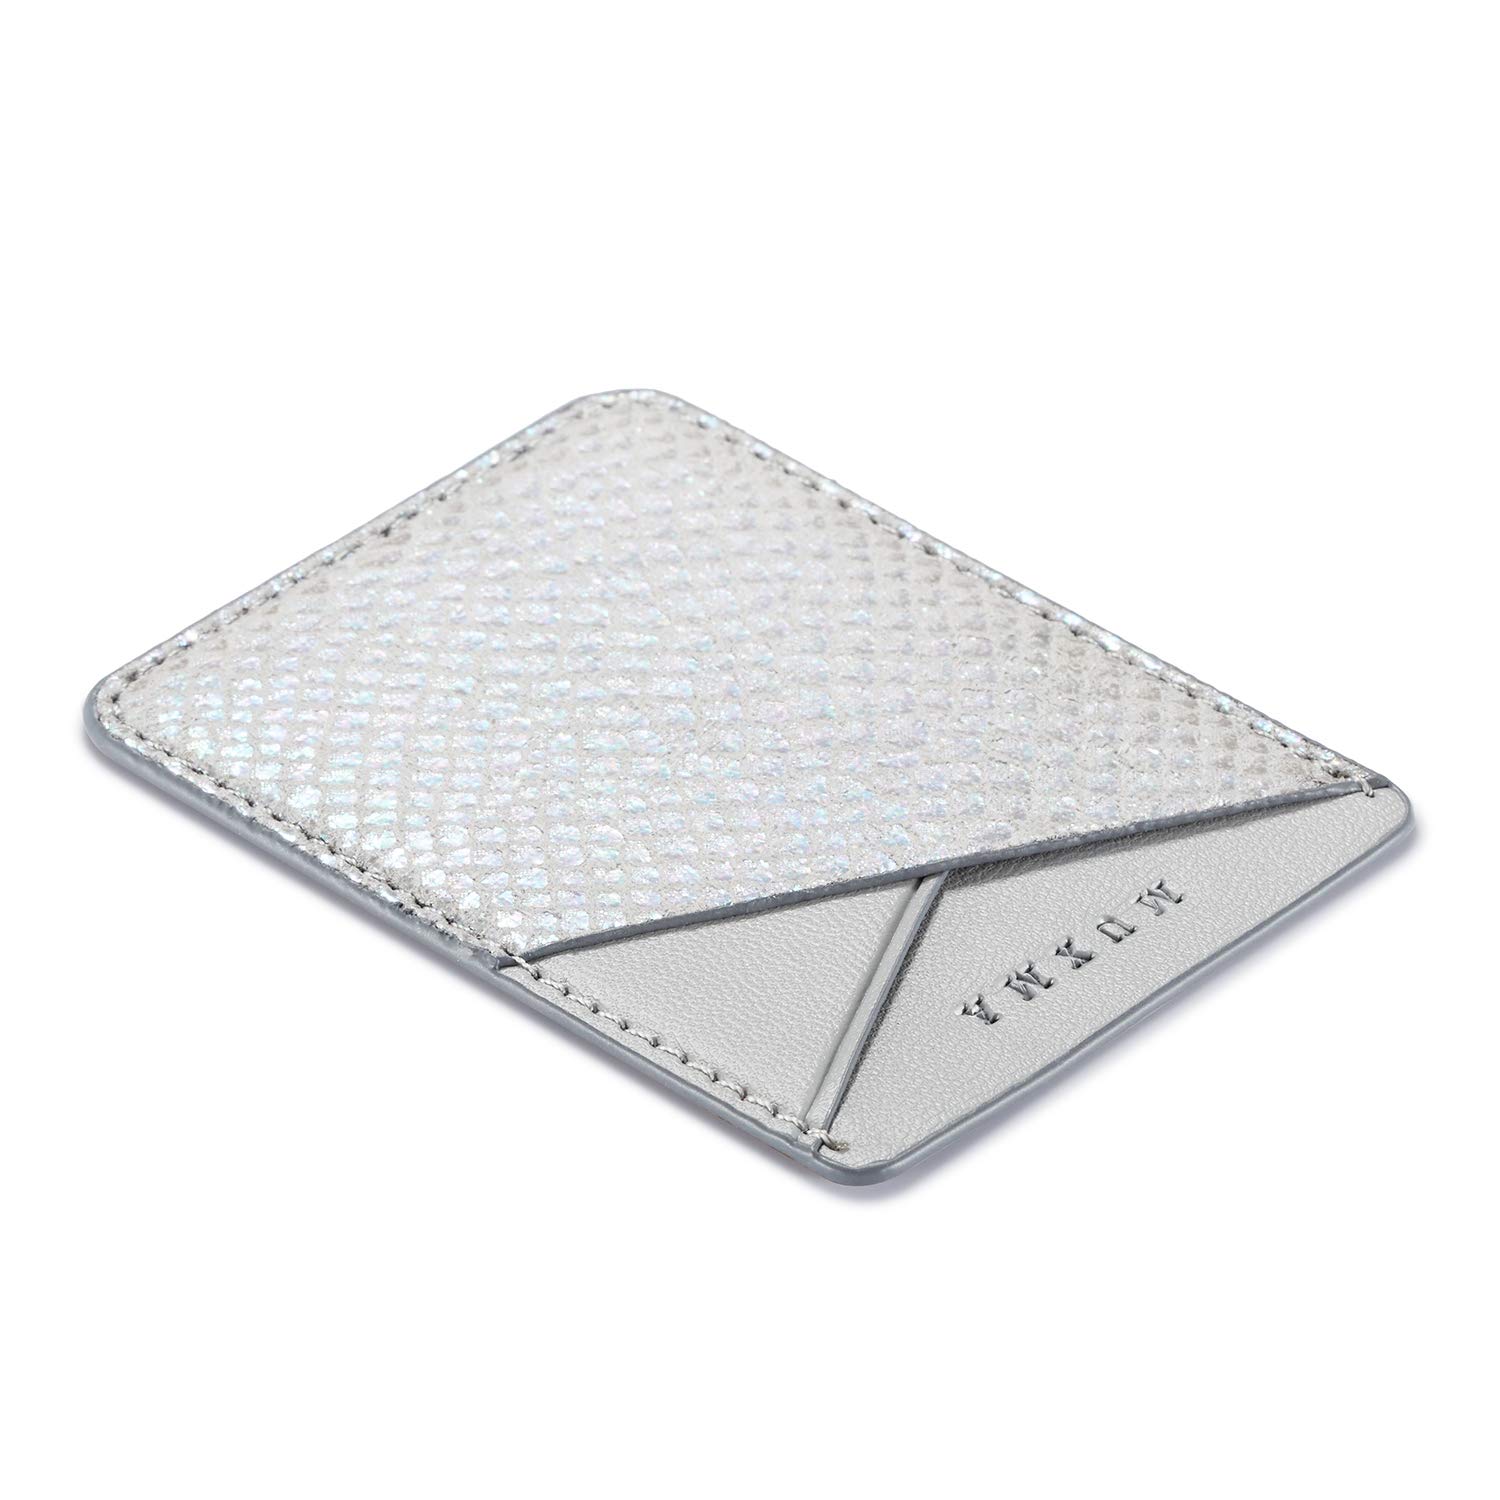 LUVI Phone Wallet Sticker Card Holder for Phone Case Credit Card Holder for Back of Phone Pocket Sleeves Stick on PU Leather Wallet with Glossy Snake Skin Silver